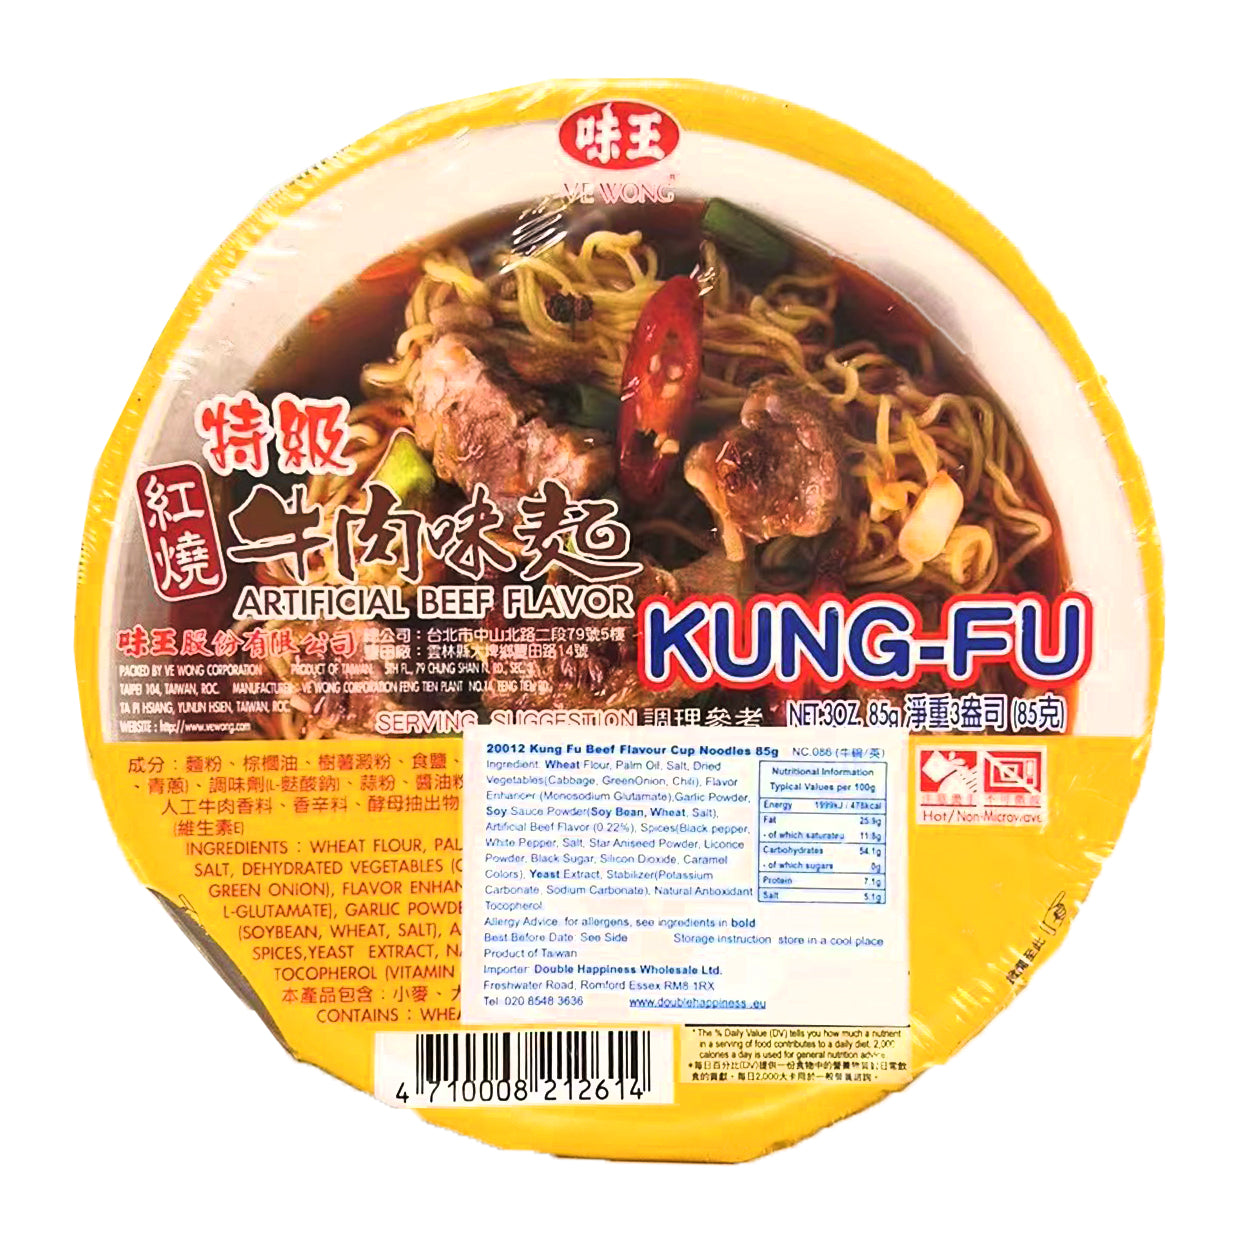 Kung Fu Beef Flavour Bowl Noodle 85g ~ 味王 特级红烧牛肉味面 85g